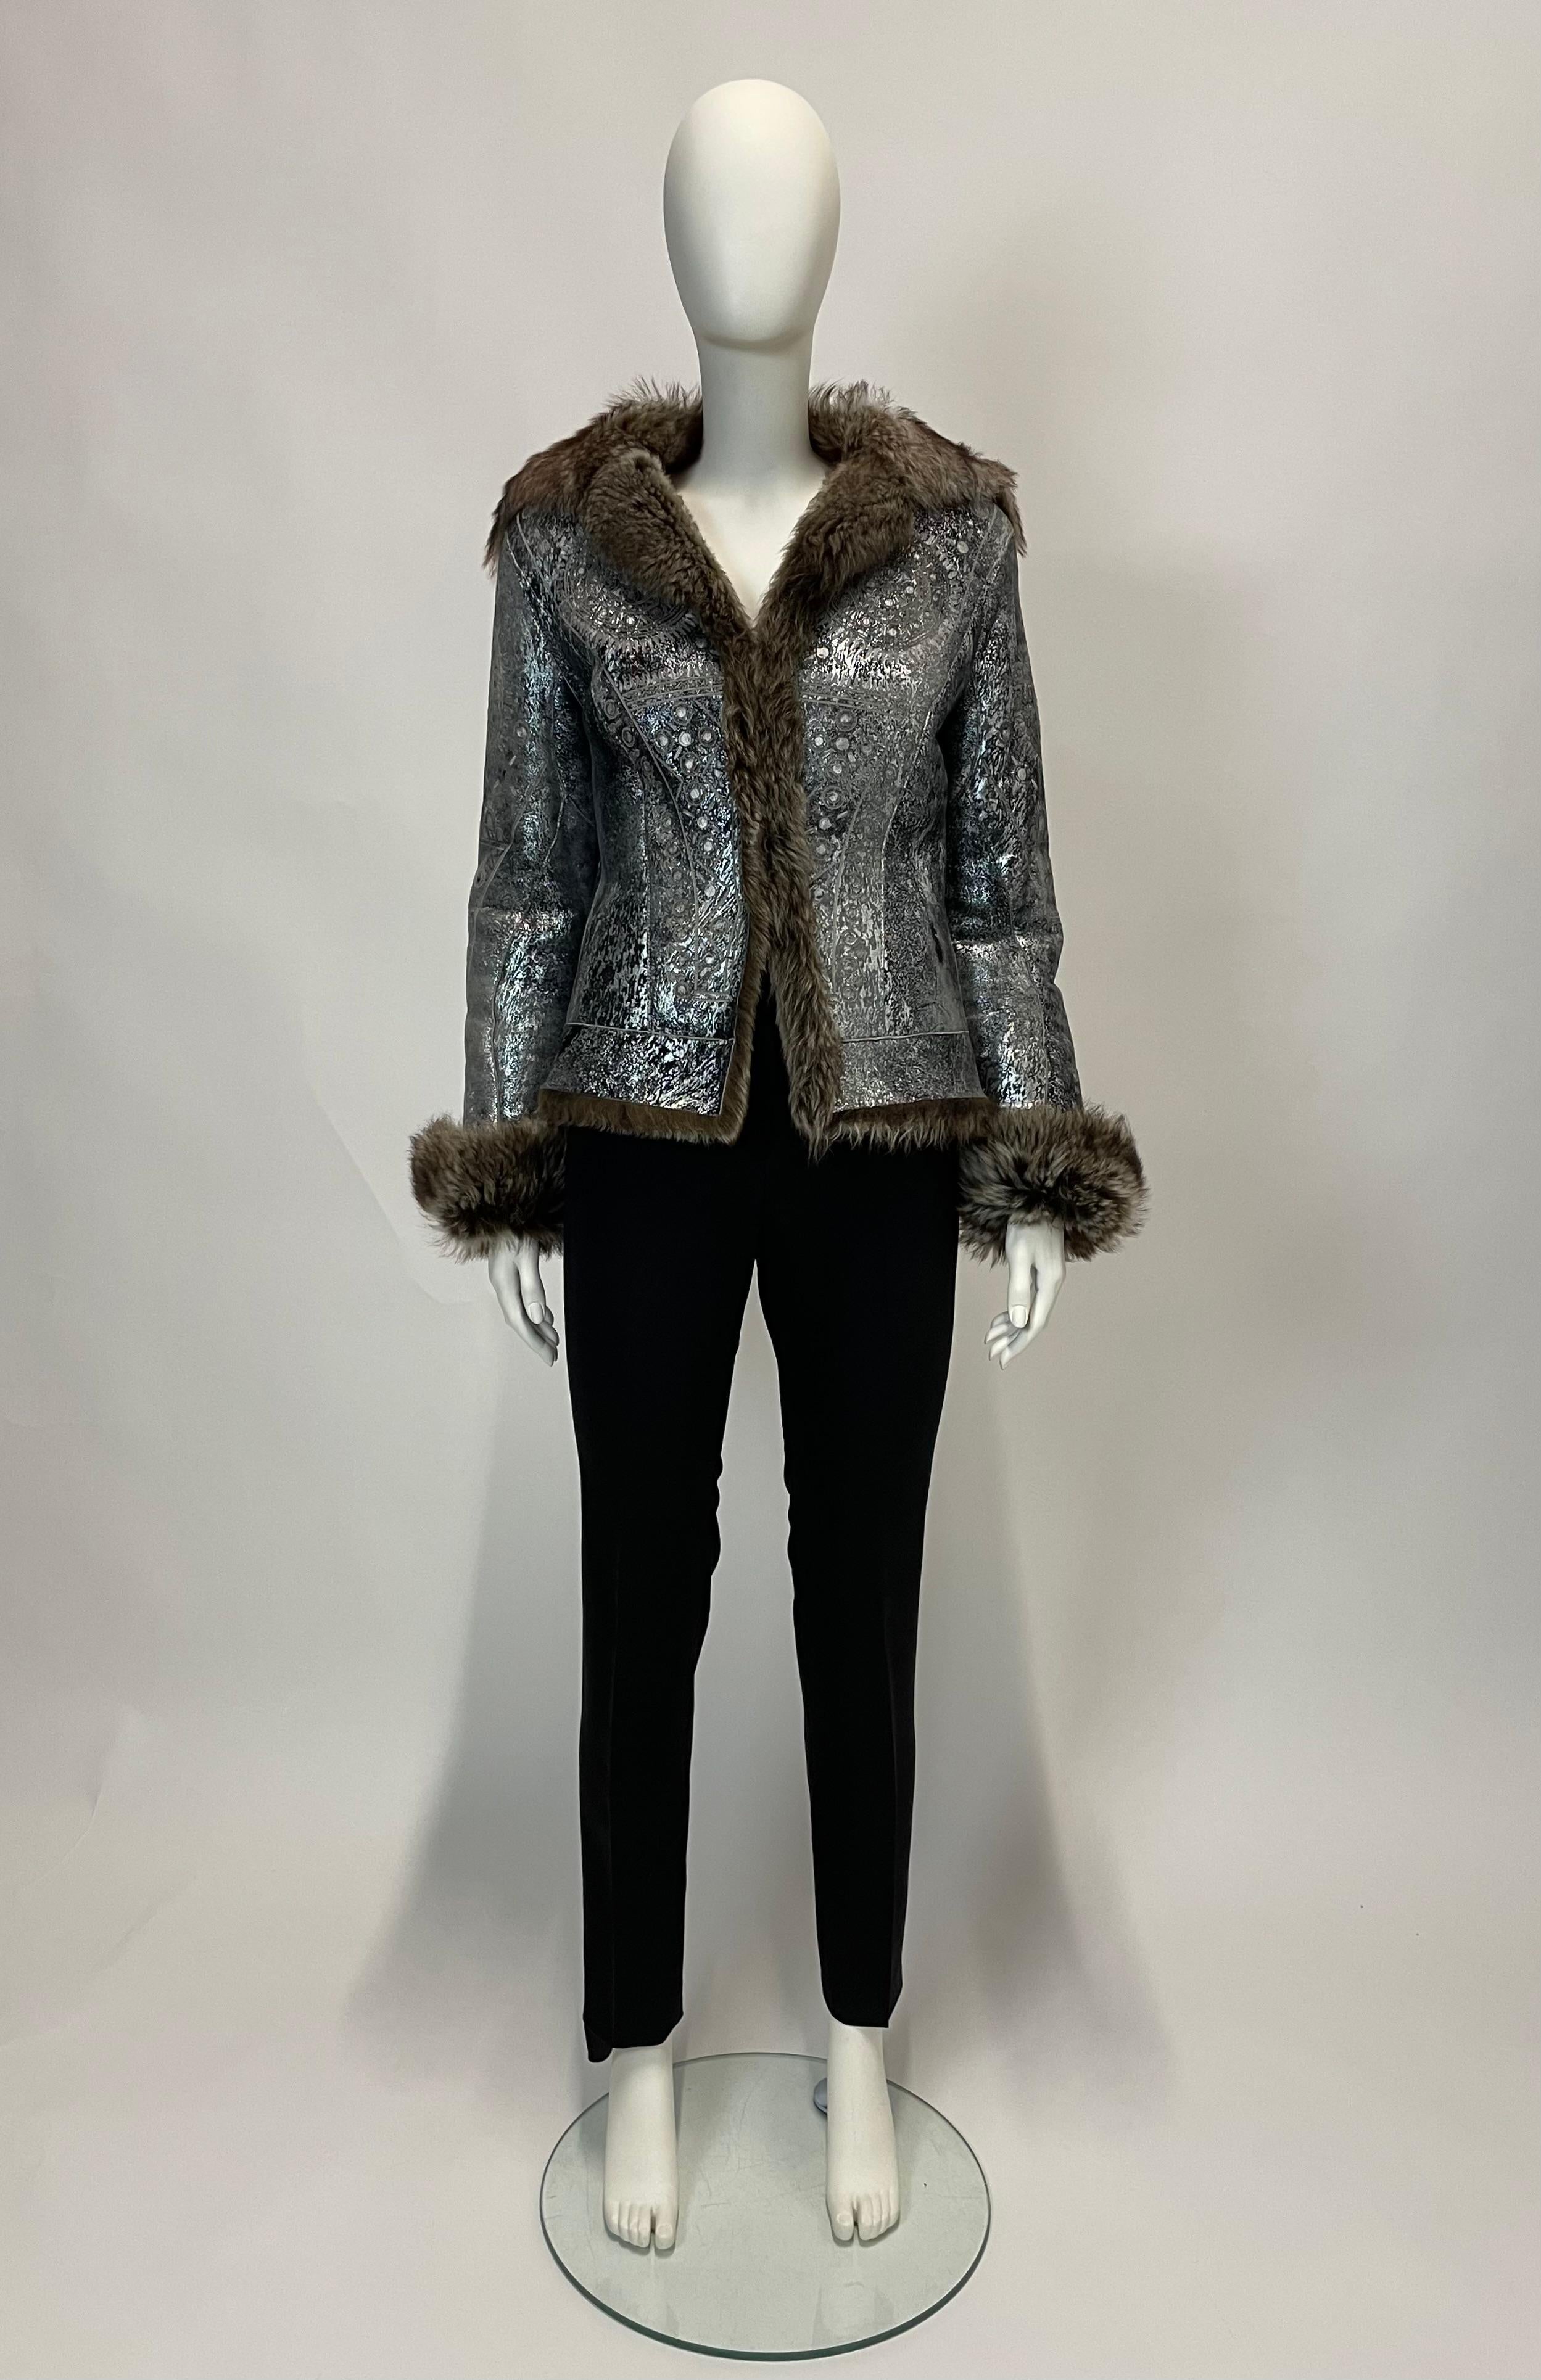 Warm and comfortable, a beautiful shearling jacket is a forever piece but that doesn't mean it can't have personality. This one by Cavalli's has a bohemian feel. It's made from shearling and contrasting leather reverse. Unlined. Labeled a size Small